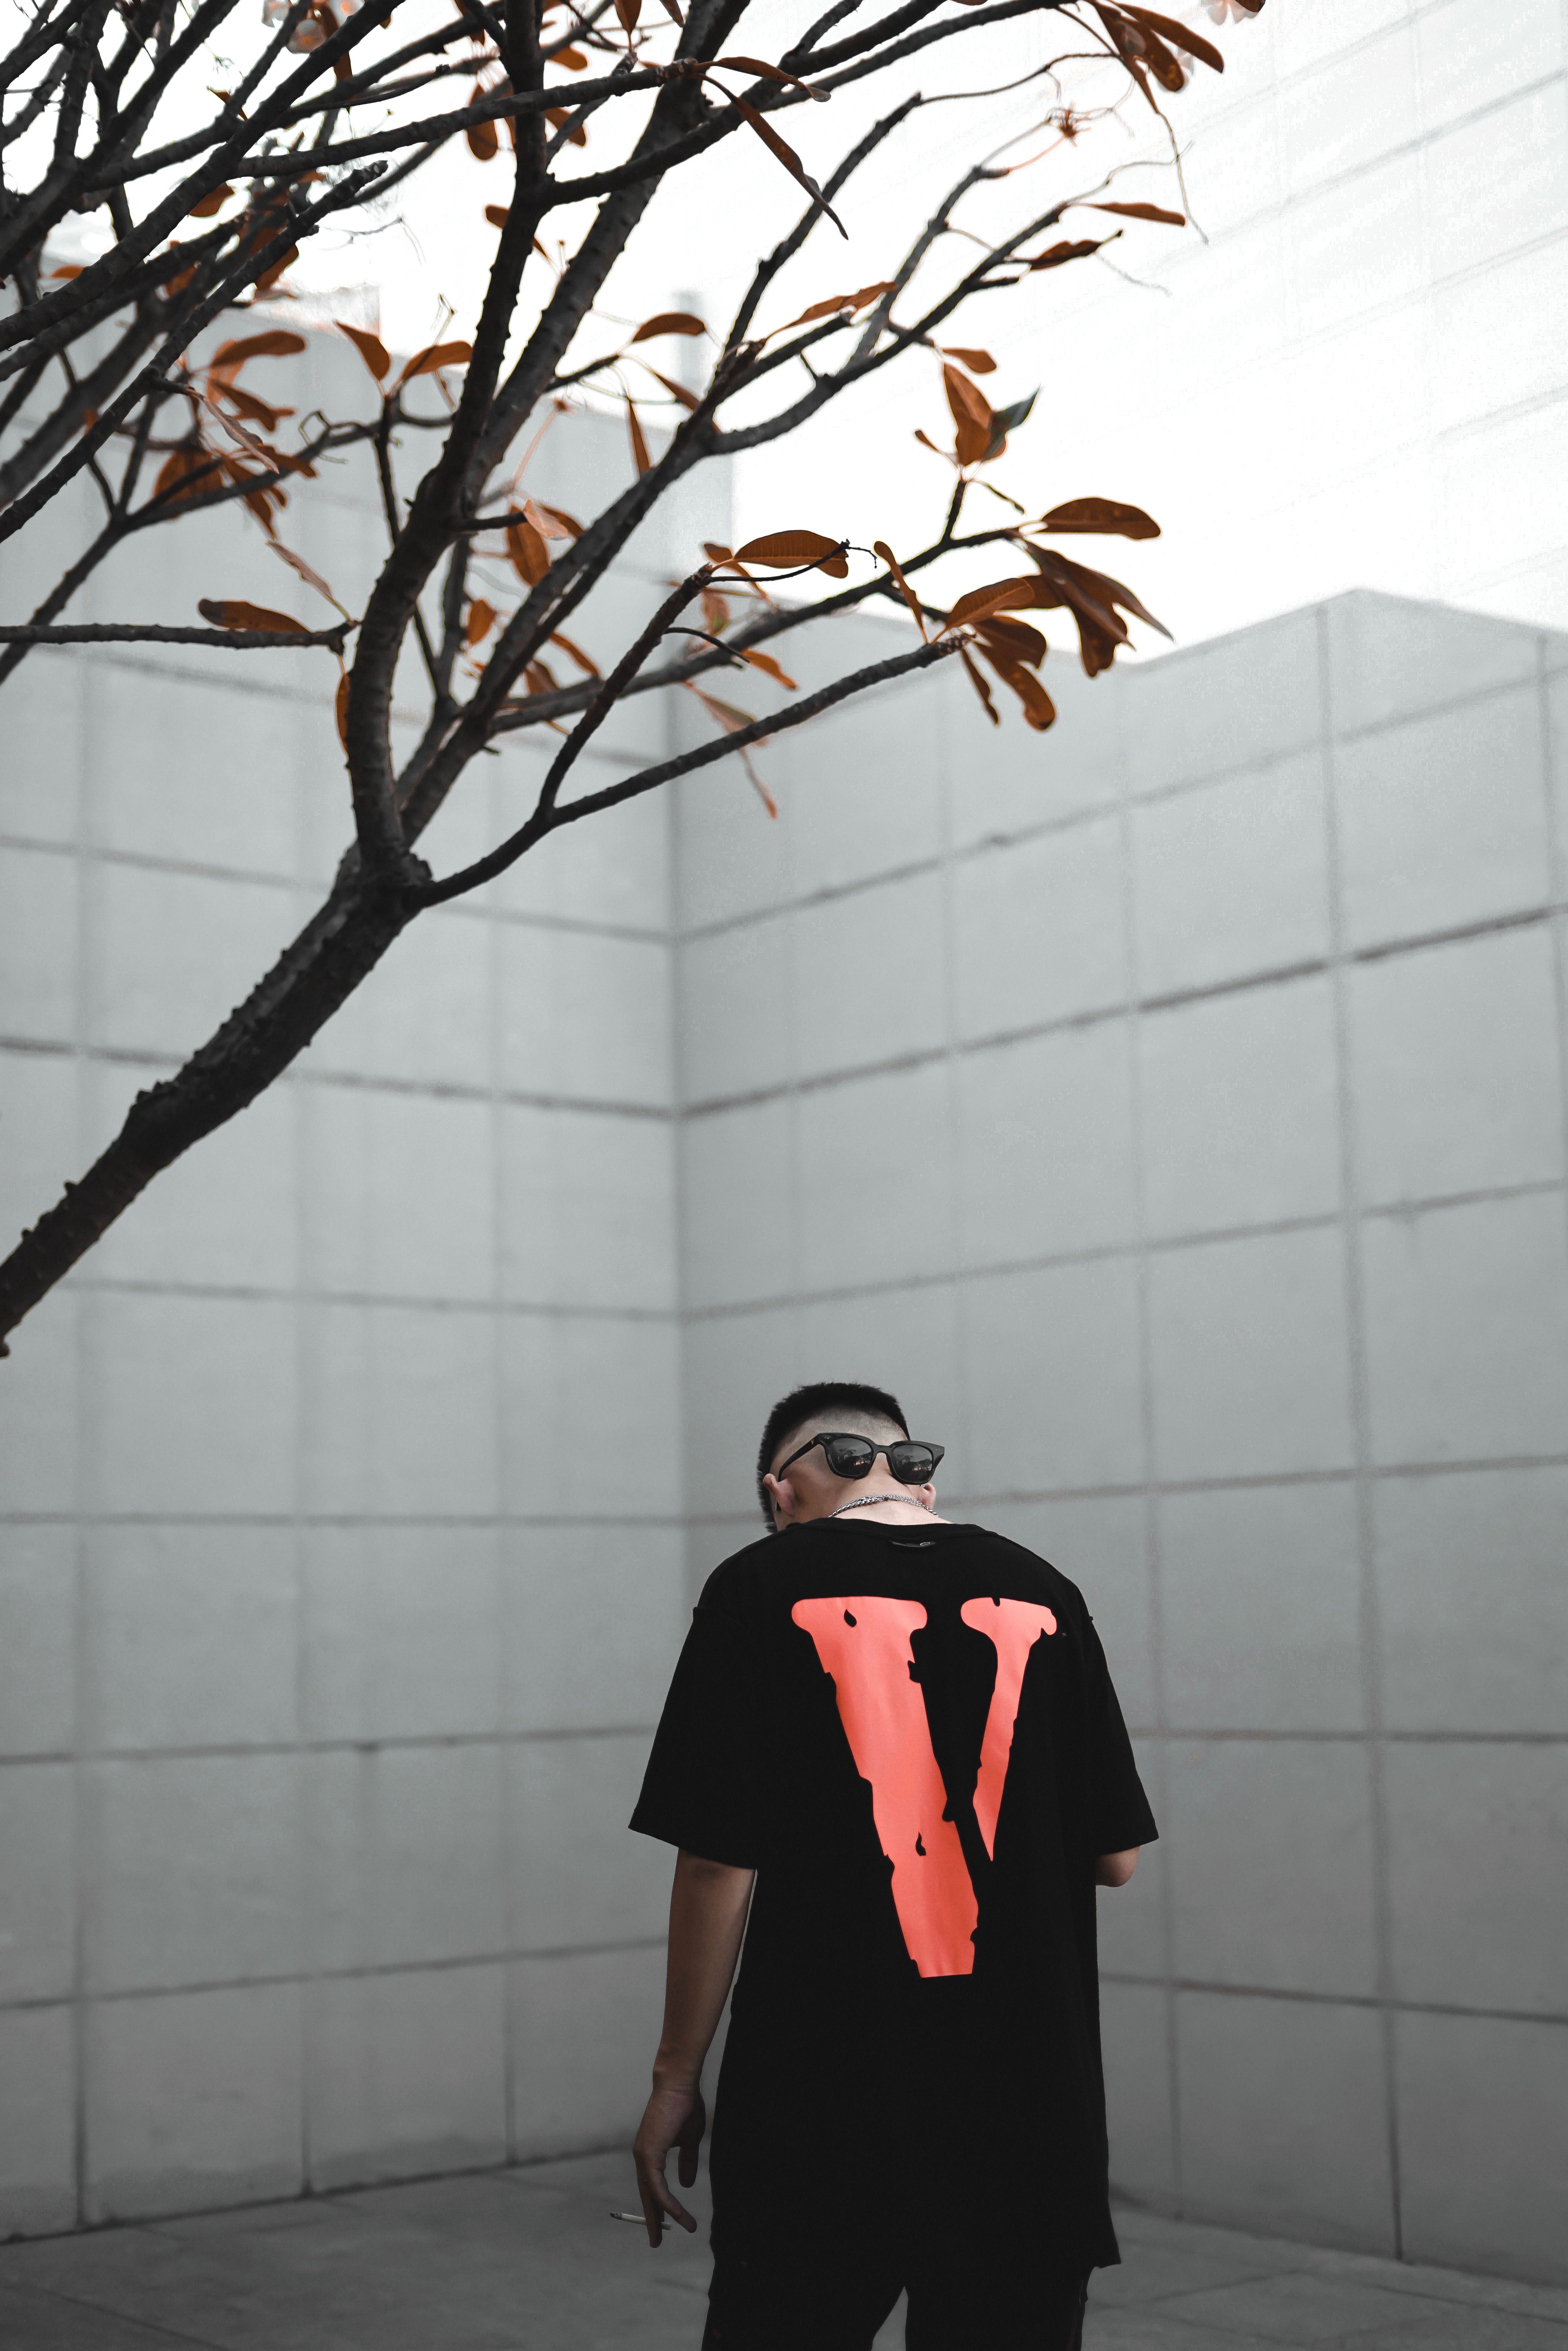 Vlone Iphone Wallpapers